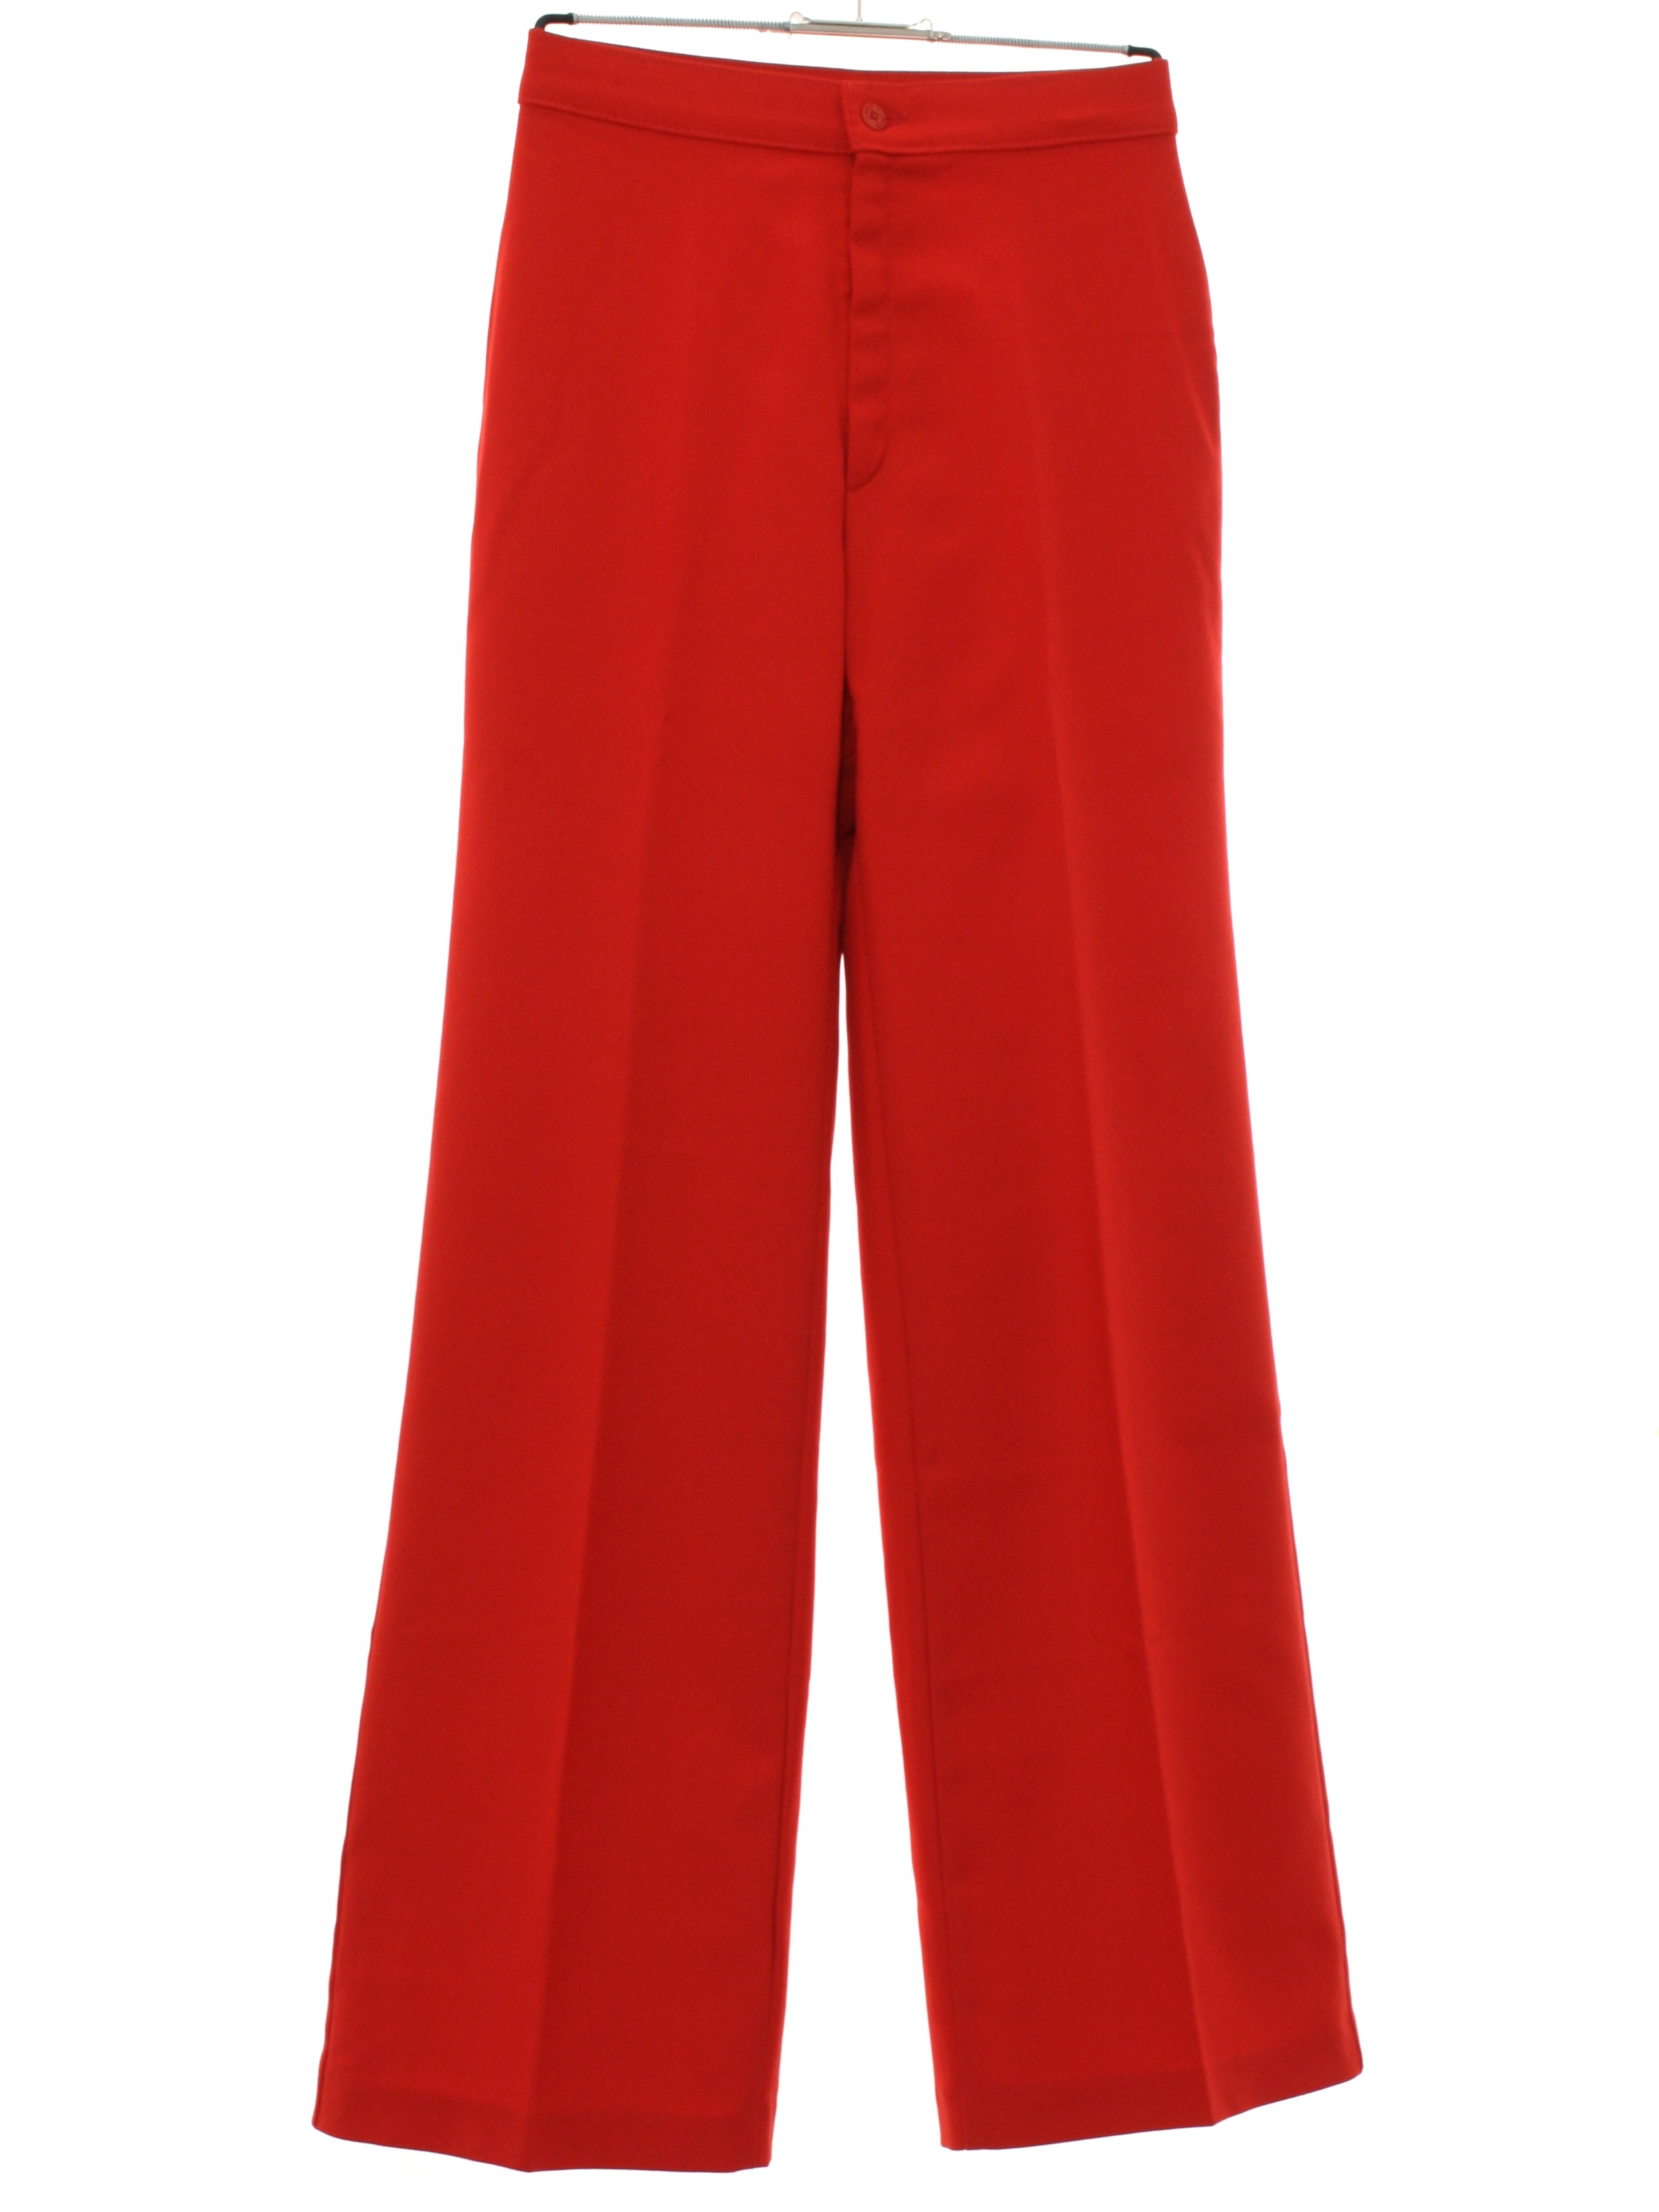 Seventies Vintage Bellbottom Pants: 70s -Levis- Womens red polyester ...